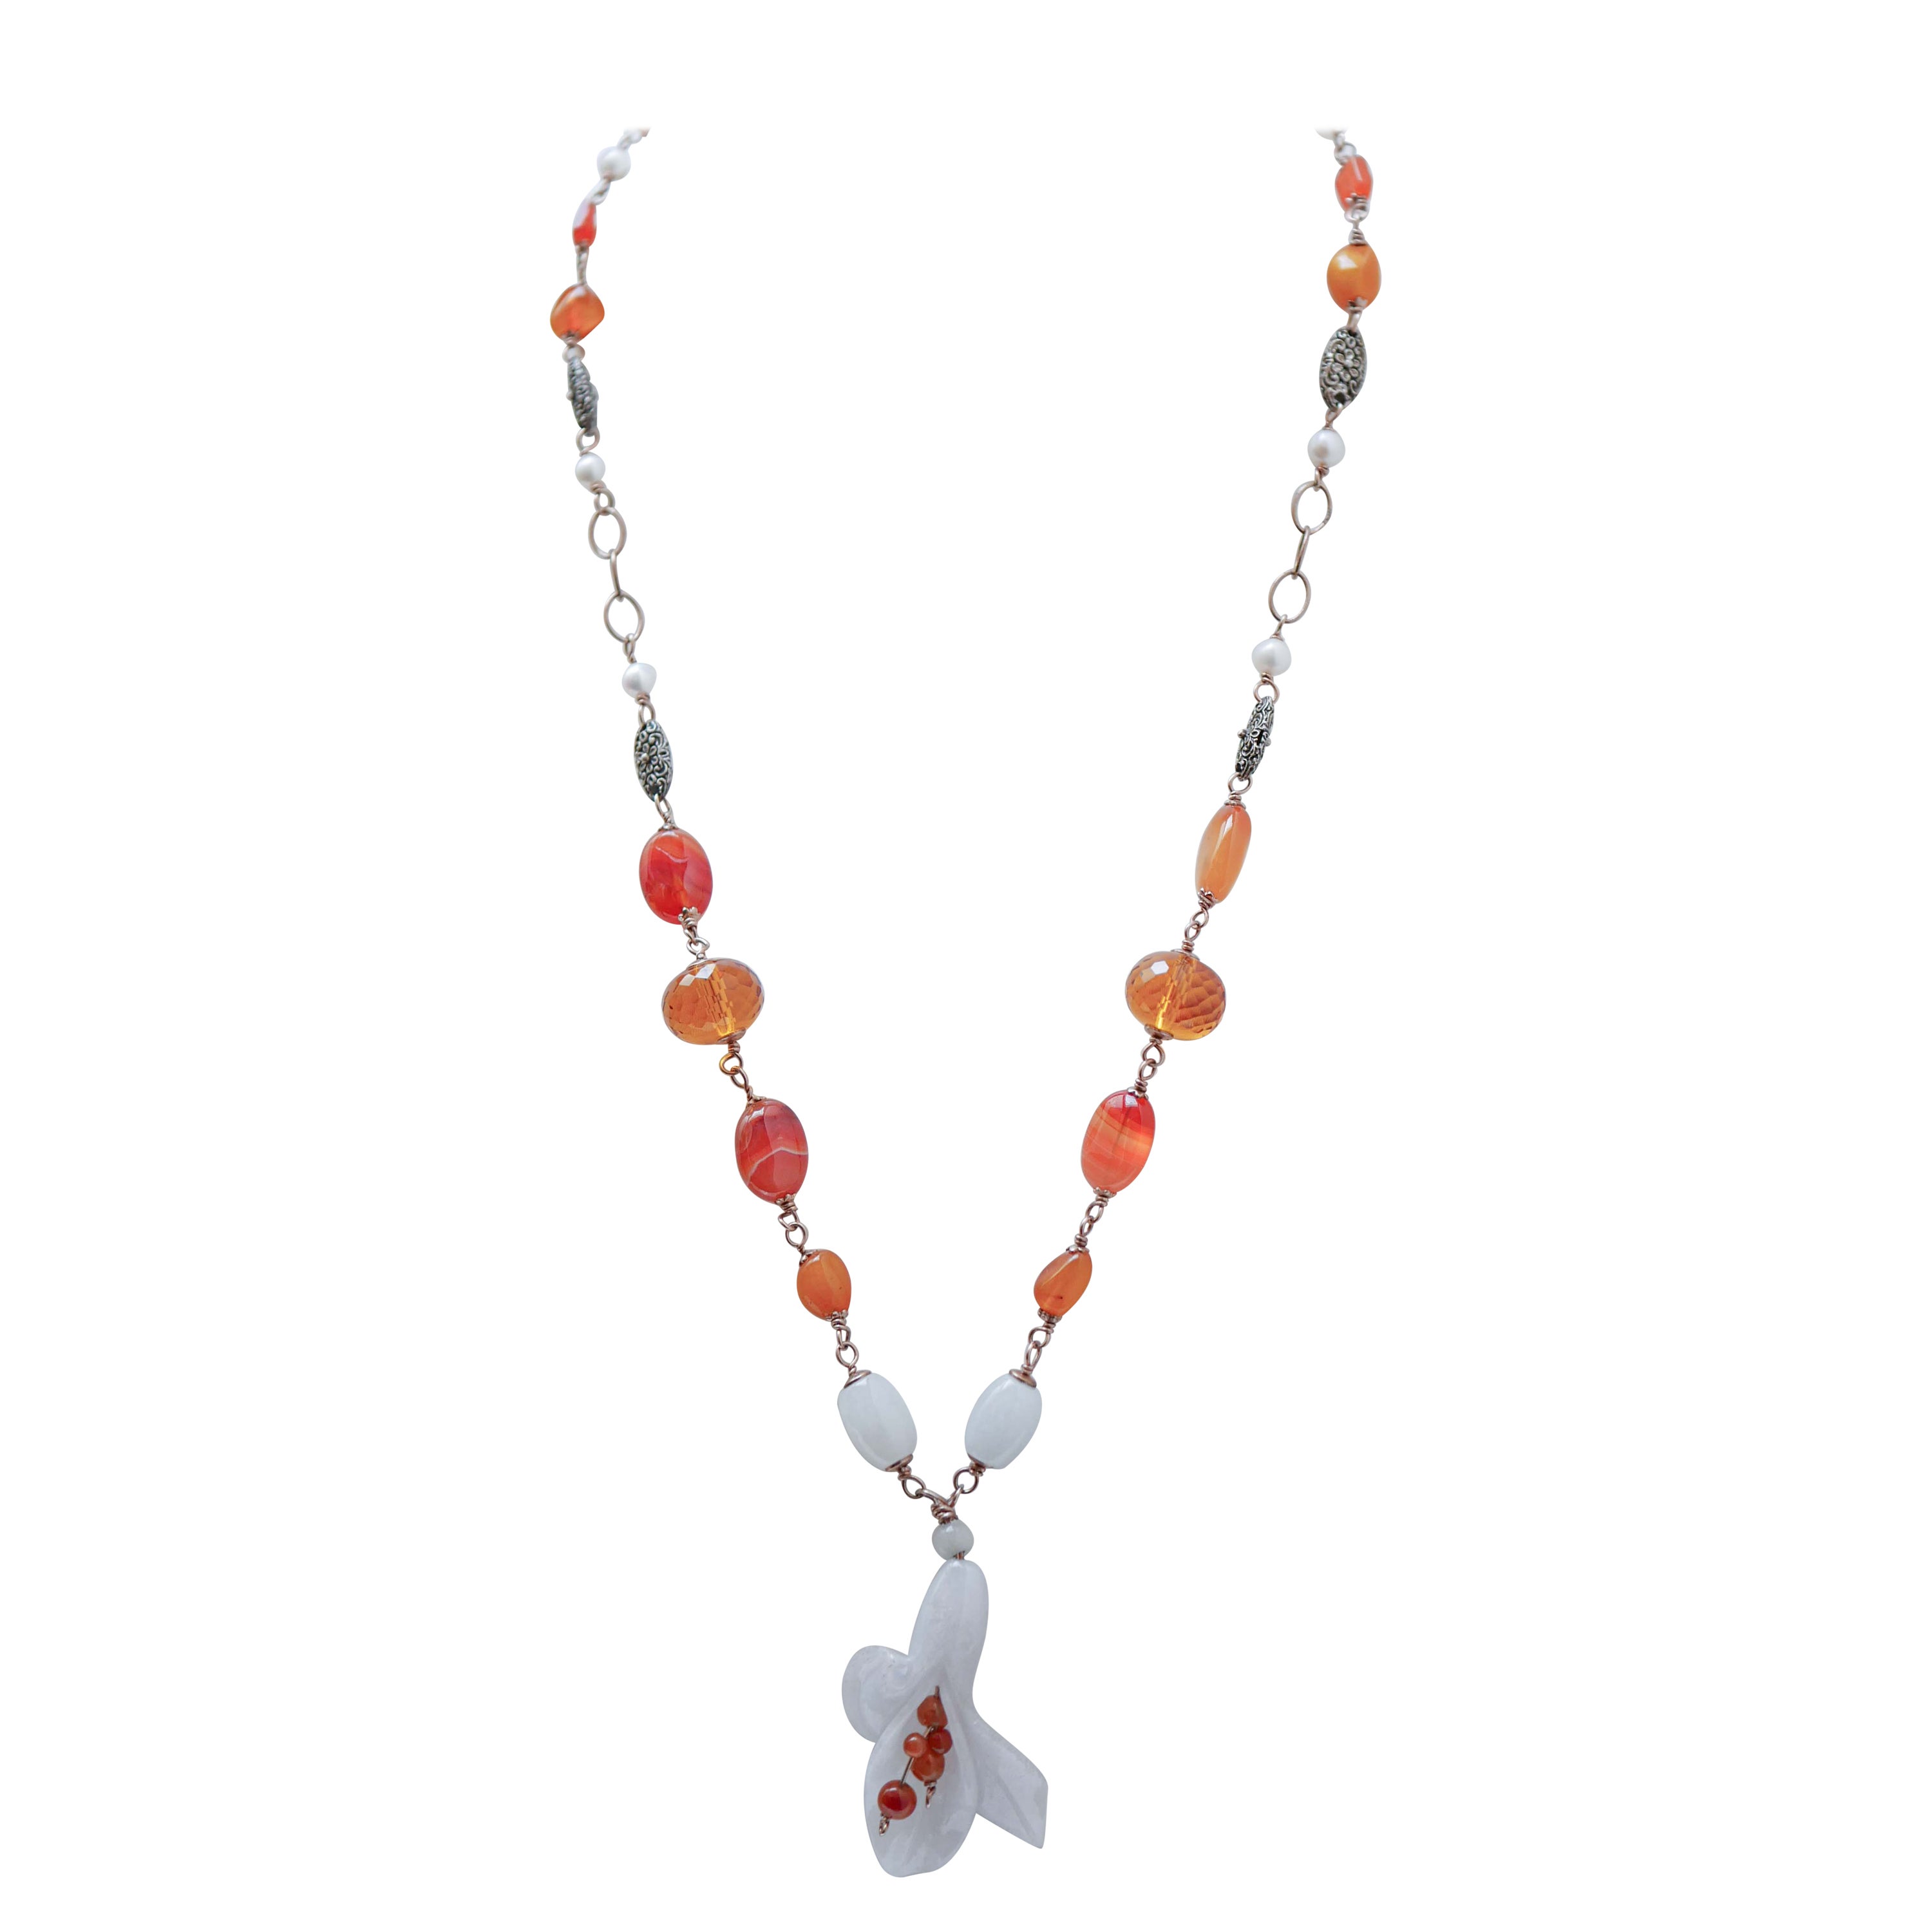 Agate, Carnelian, Hydrothermal Topazs, Amber, Pearls,  Gold and Silver Necklace. For Sale